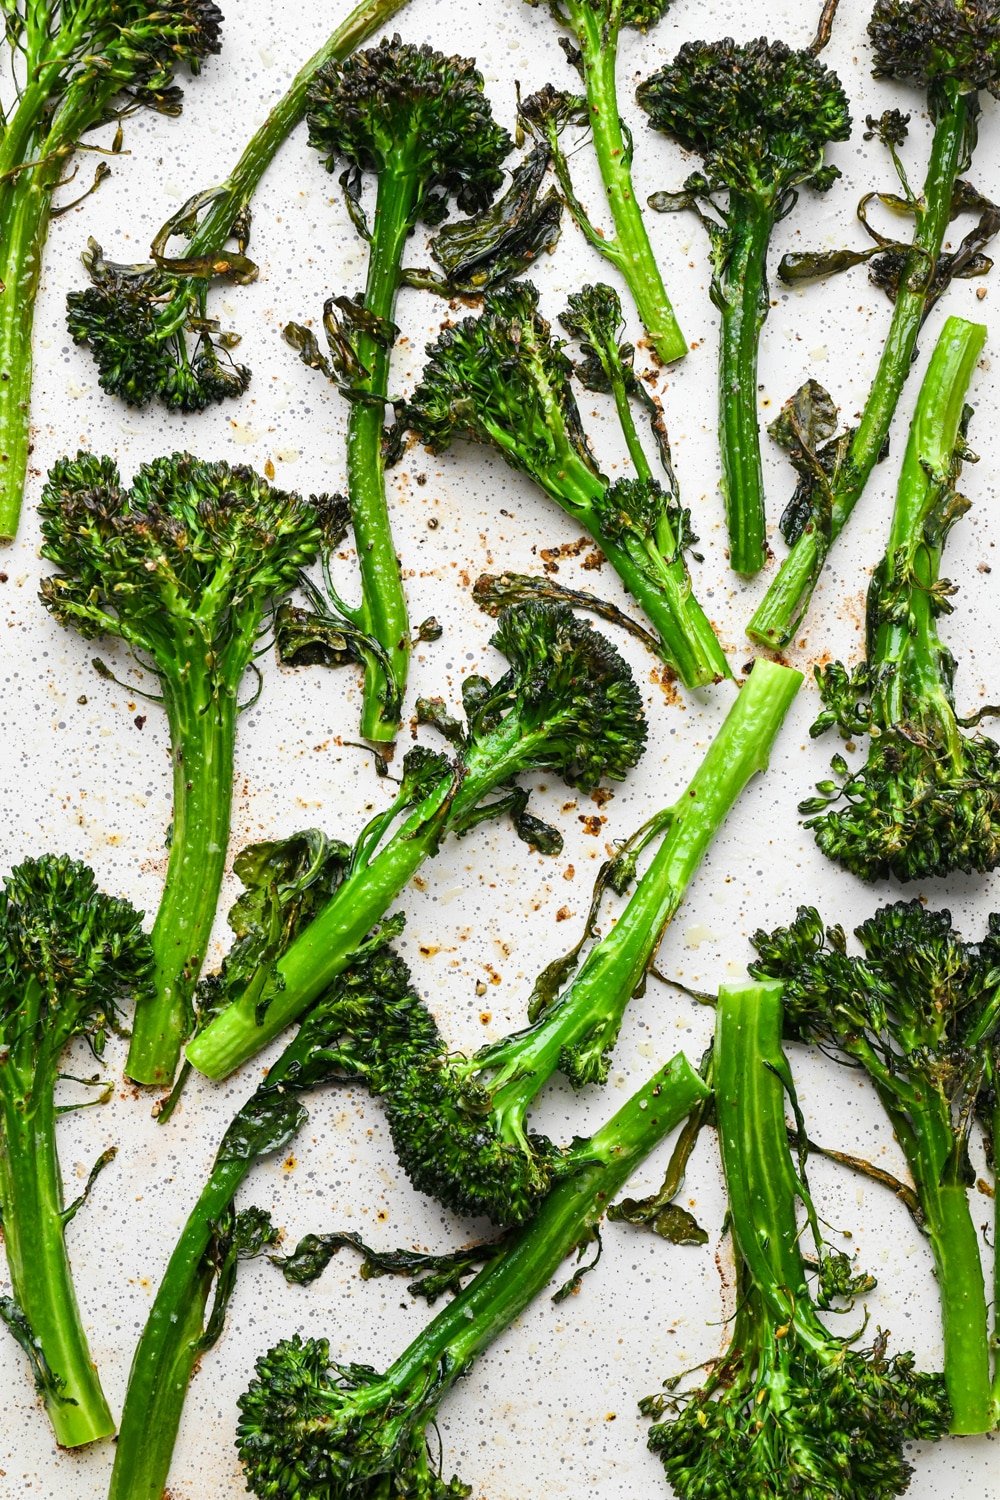 How to make roasted broccolini: Roasted broccolini stalks on sheet pan right after coming out of the oven. The broccolini is bright green with bits of charred pieces.